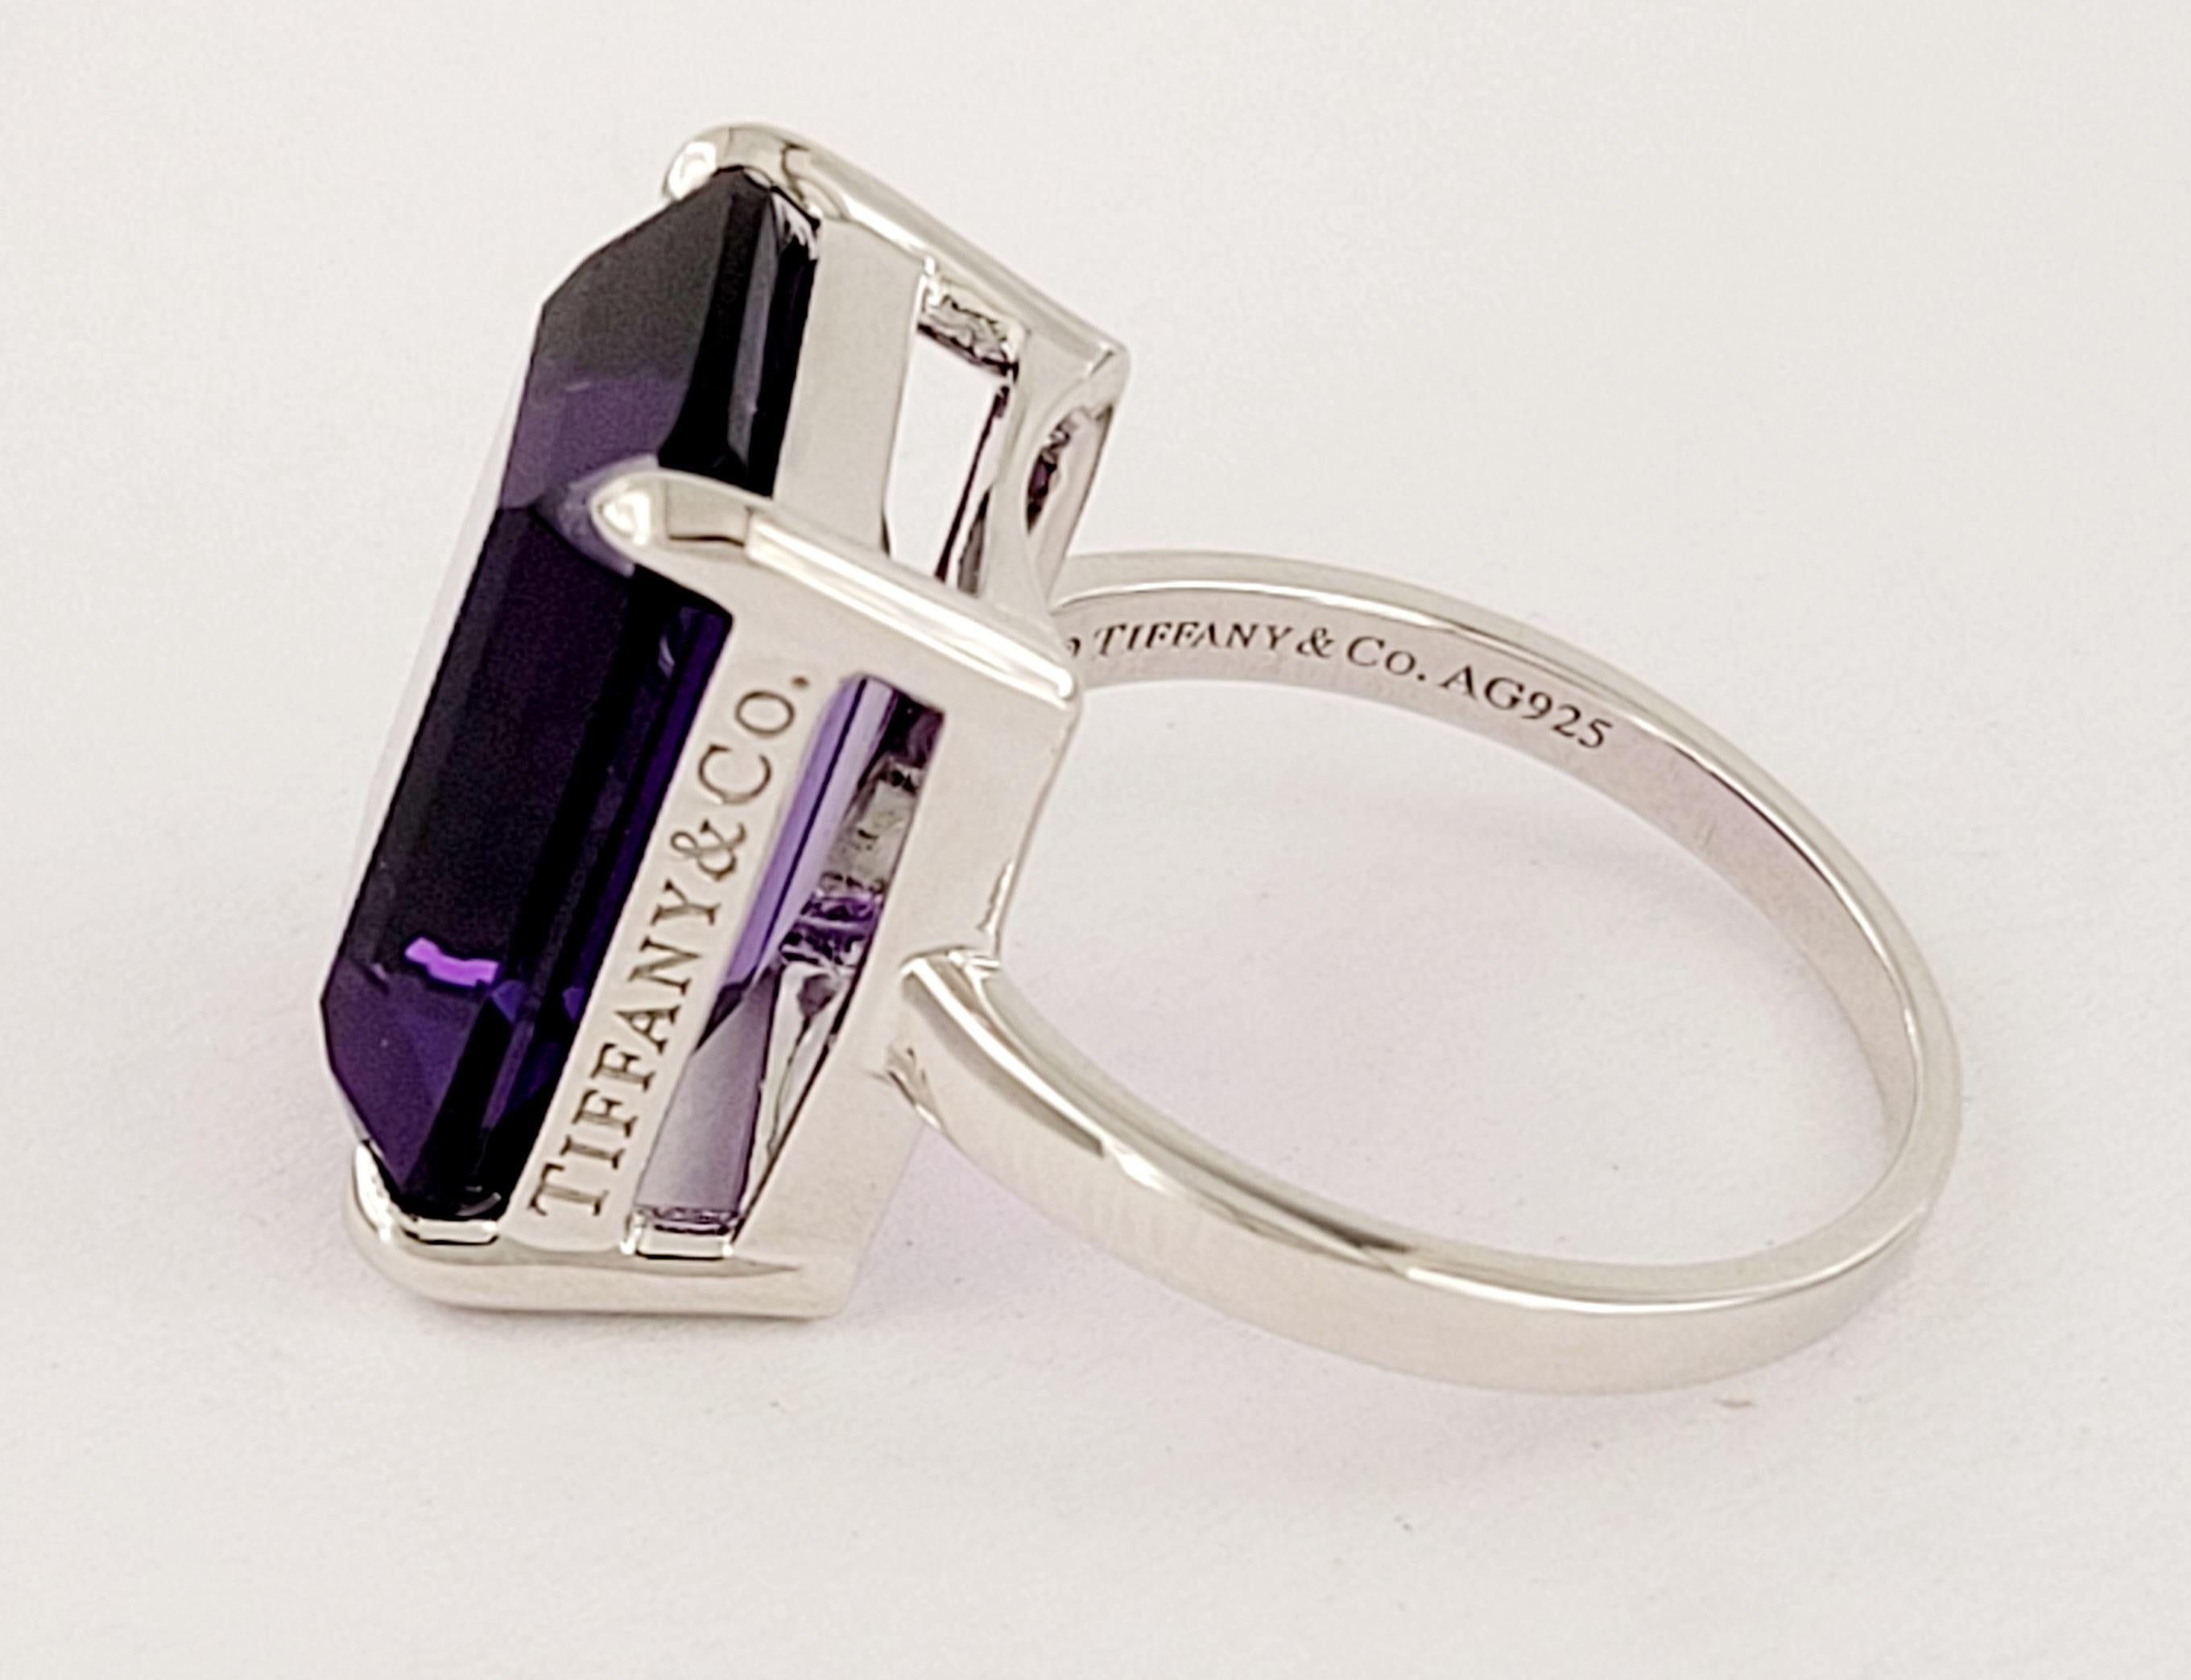 Tiffany& Co Sparkler Amethyst Gemstone

Emerald cut Amethyst 

Stone Color Purple 

Amethyst Dimension 16 X 12mm

Ring Size 7

Ring Weight 3.2gr

Condition new, never worn

Tiffany& Co Pouch included

Retail Price $1.250

